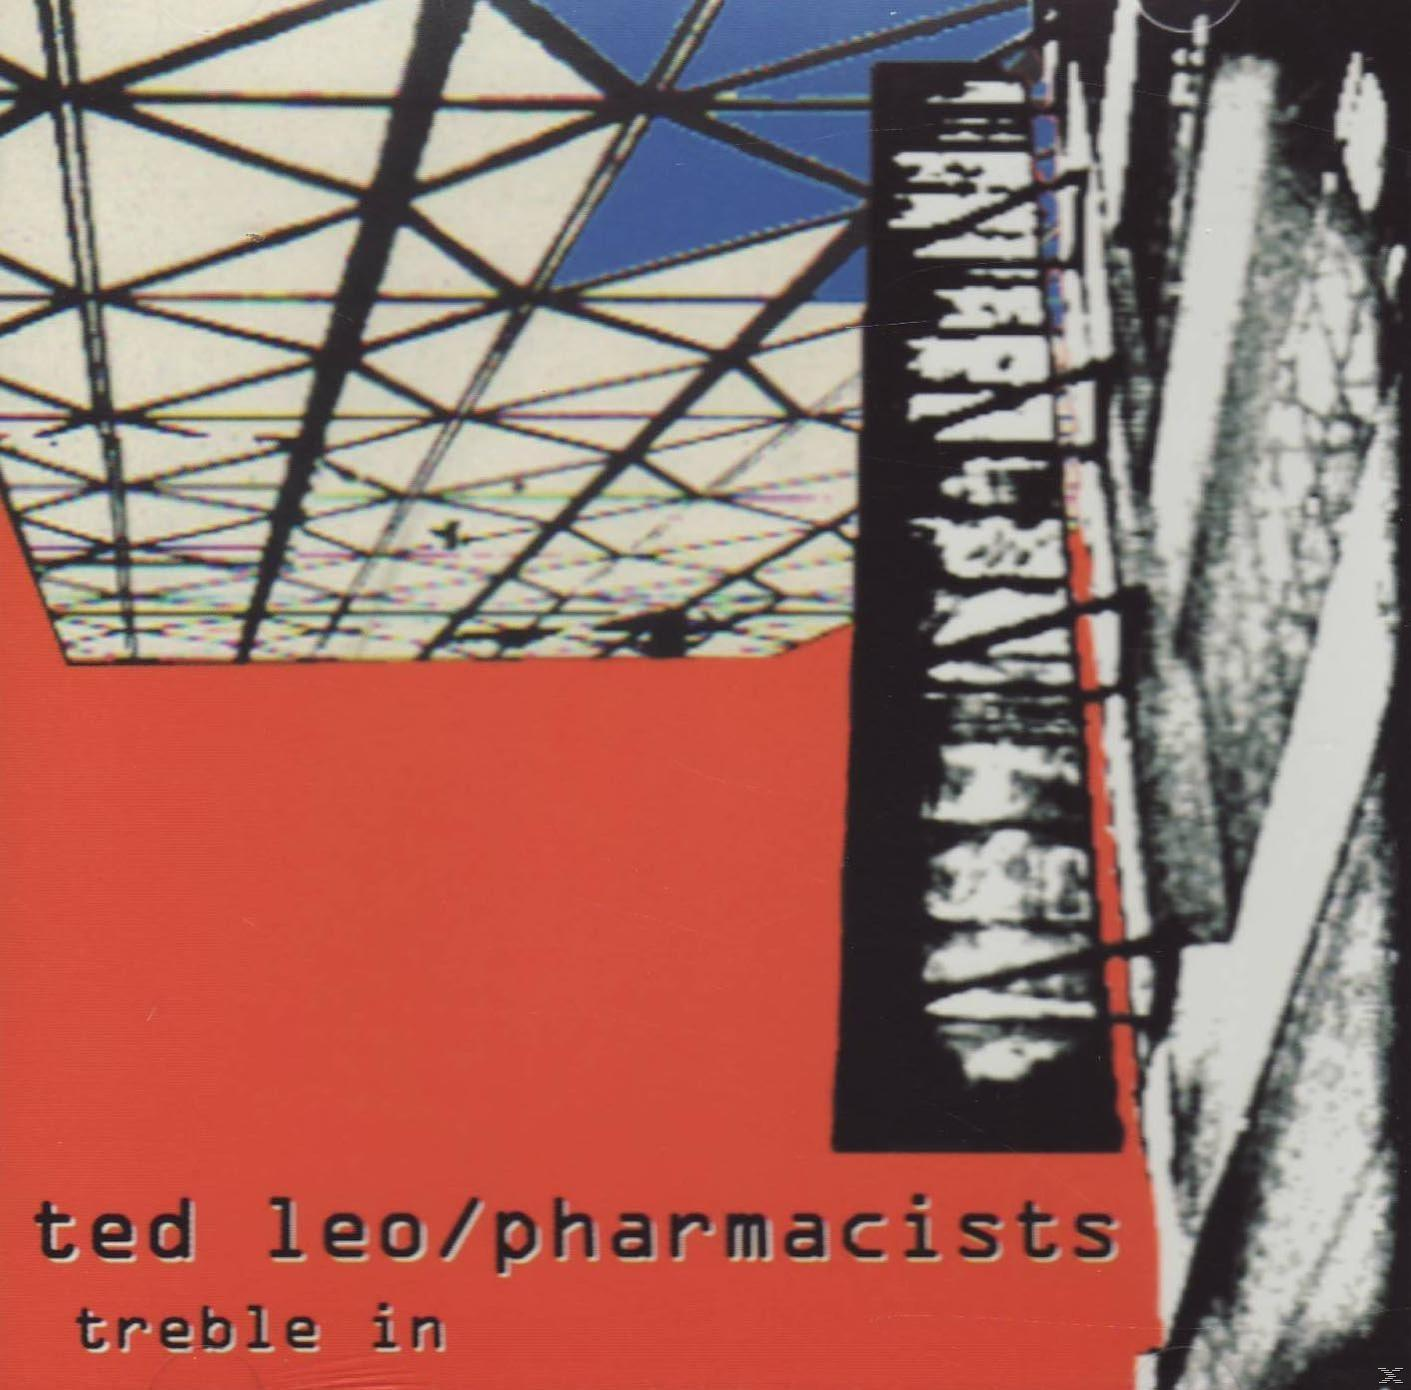 Ted Leo, The Pharmacists - (2-Track)) Ep 3 Trouble Treble Zoll - In (CD Single